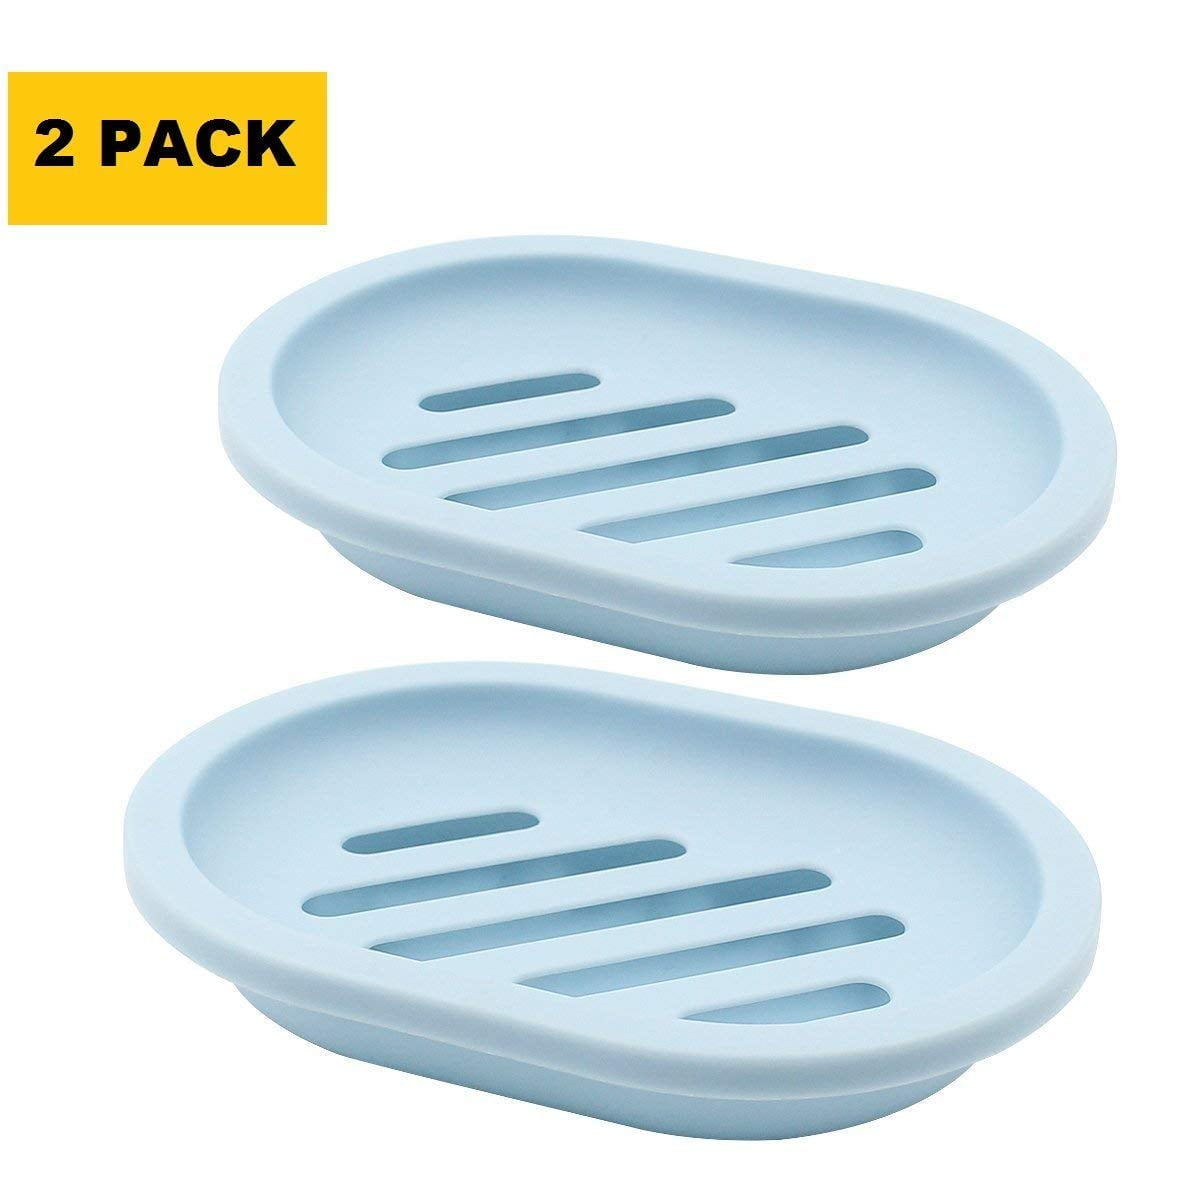 Soap Holder 2-Pack Soap Dish With DrainHolder Easy Cleaning Dry, Soap Saver